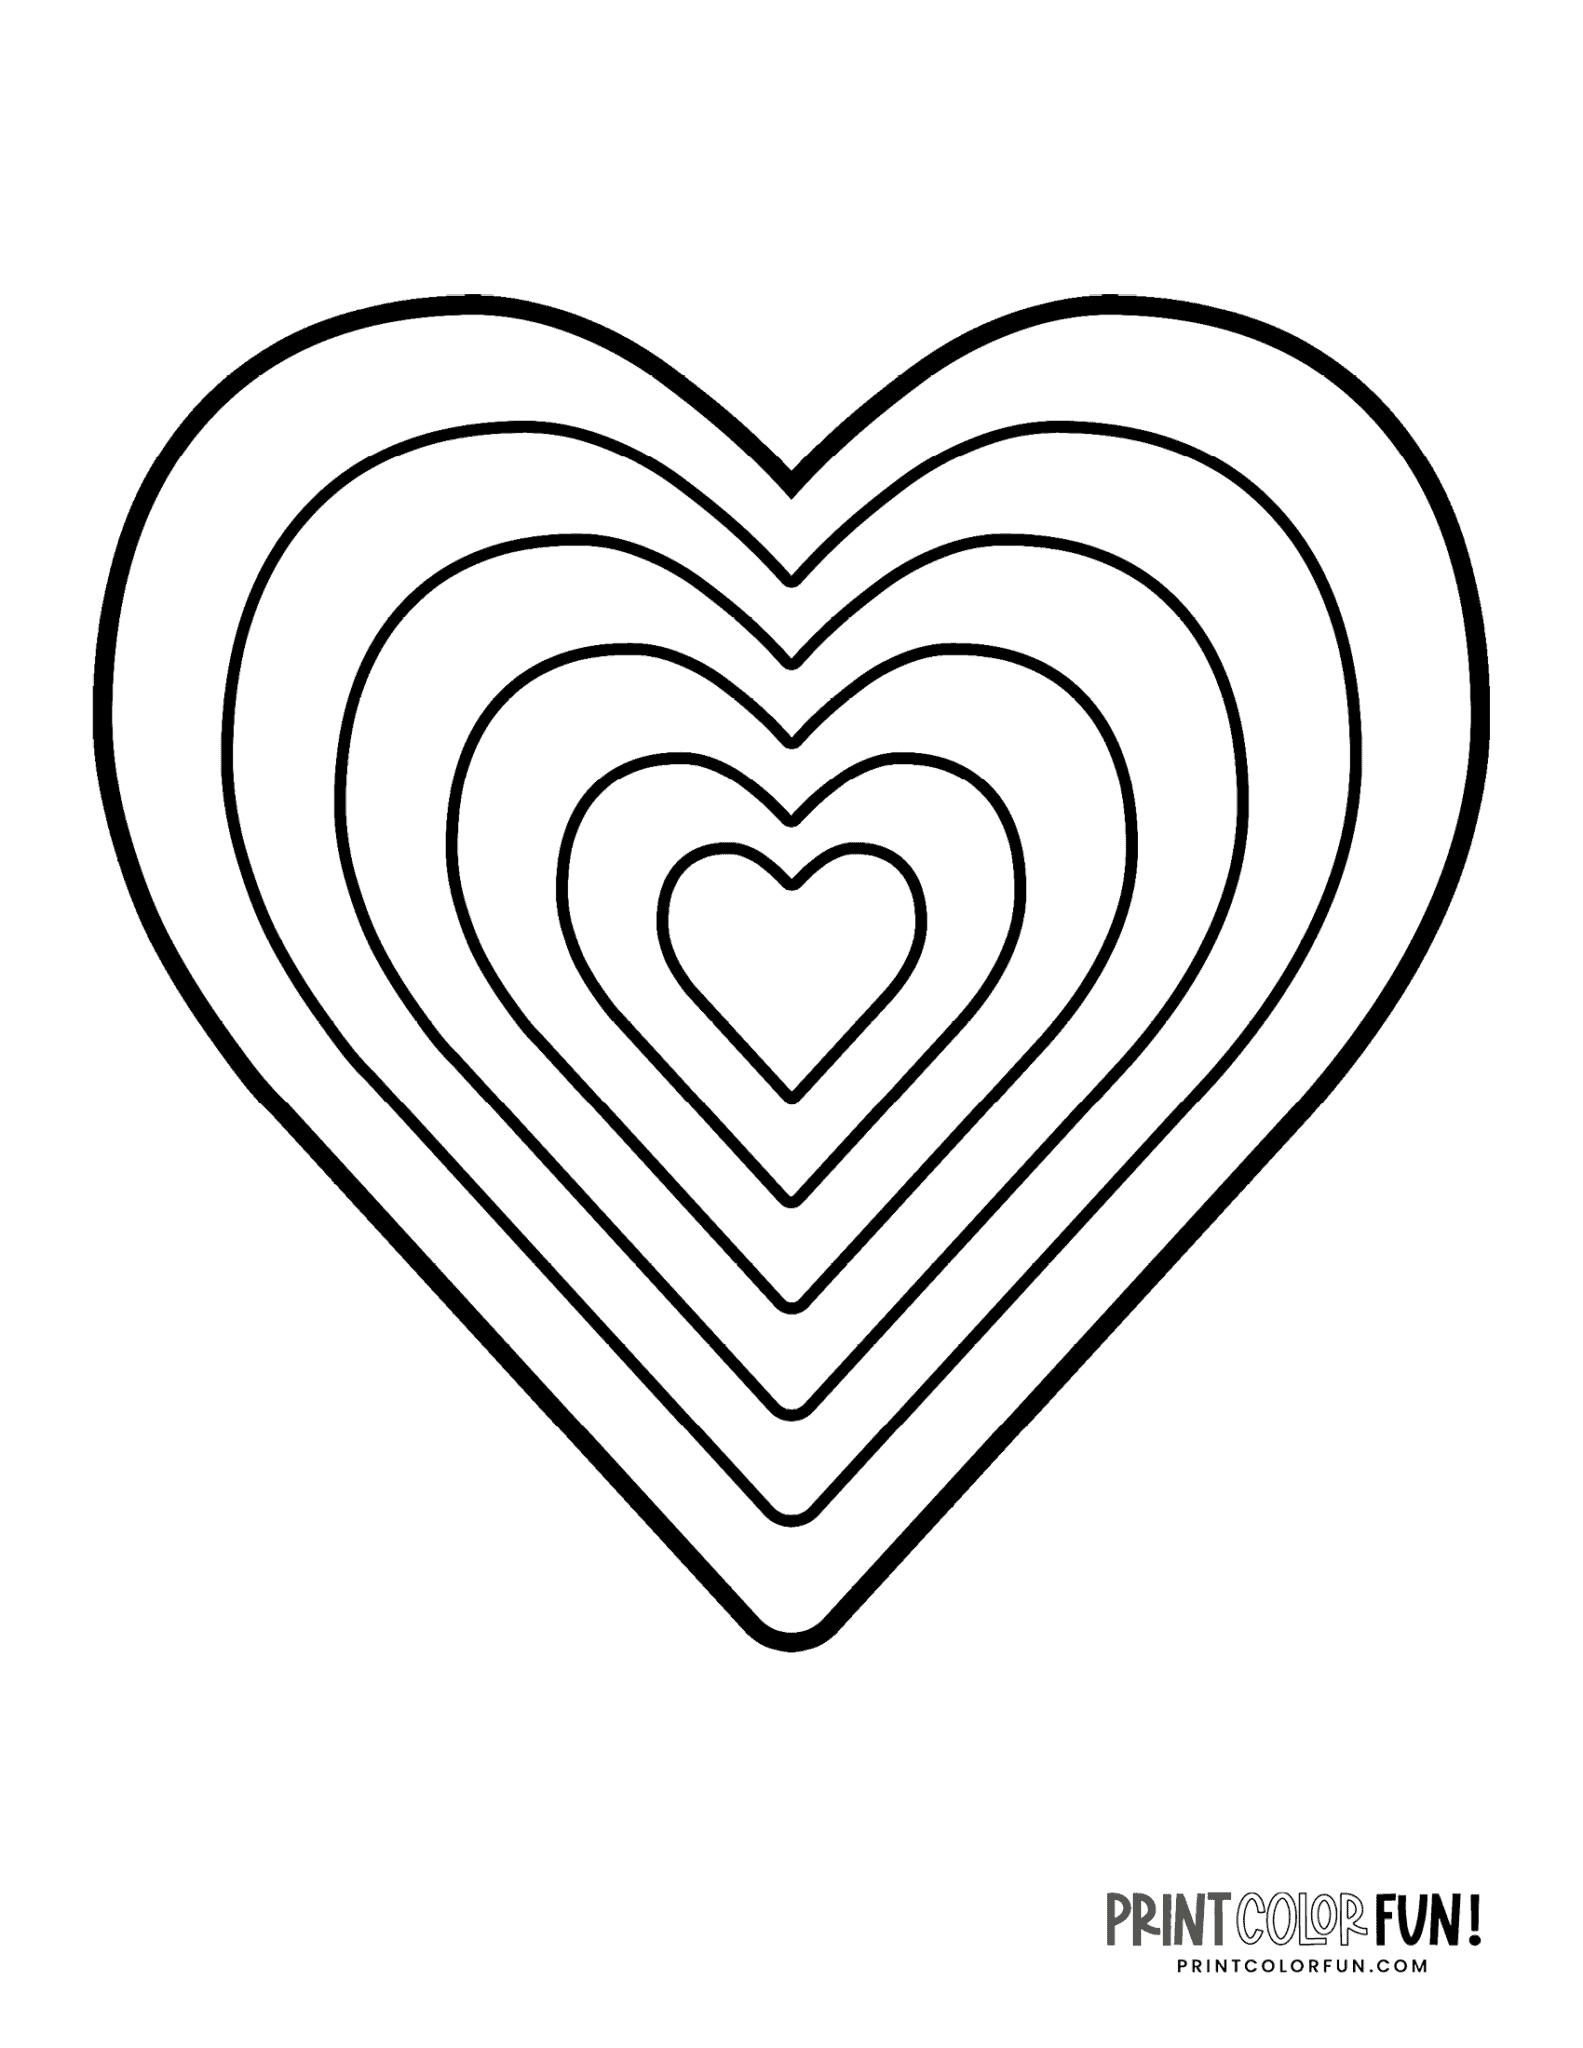 free-printable-heart-coloring-pages-for-kids-free-printable-heart